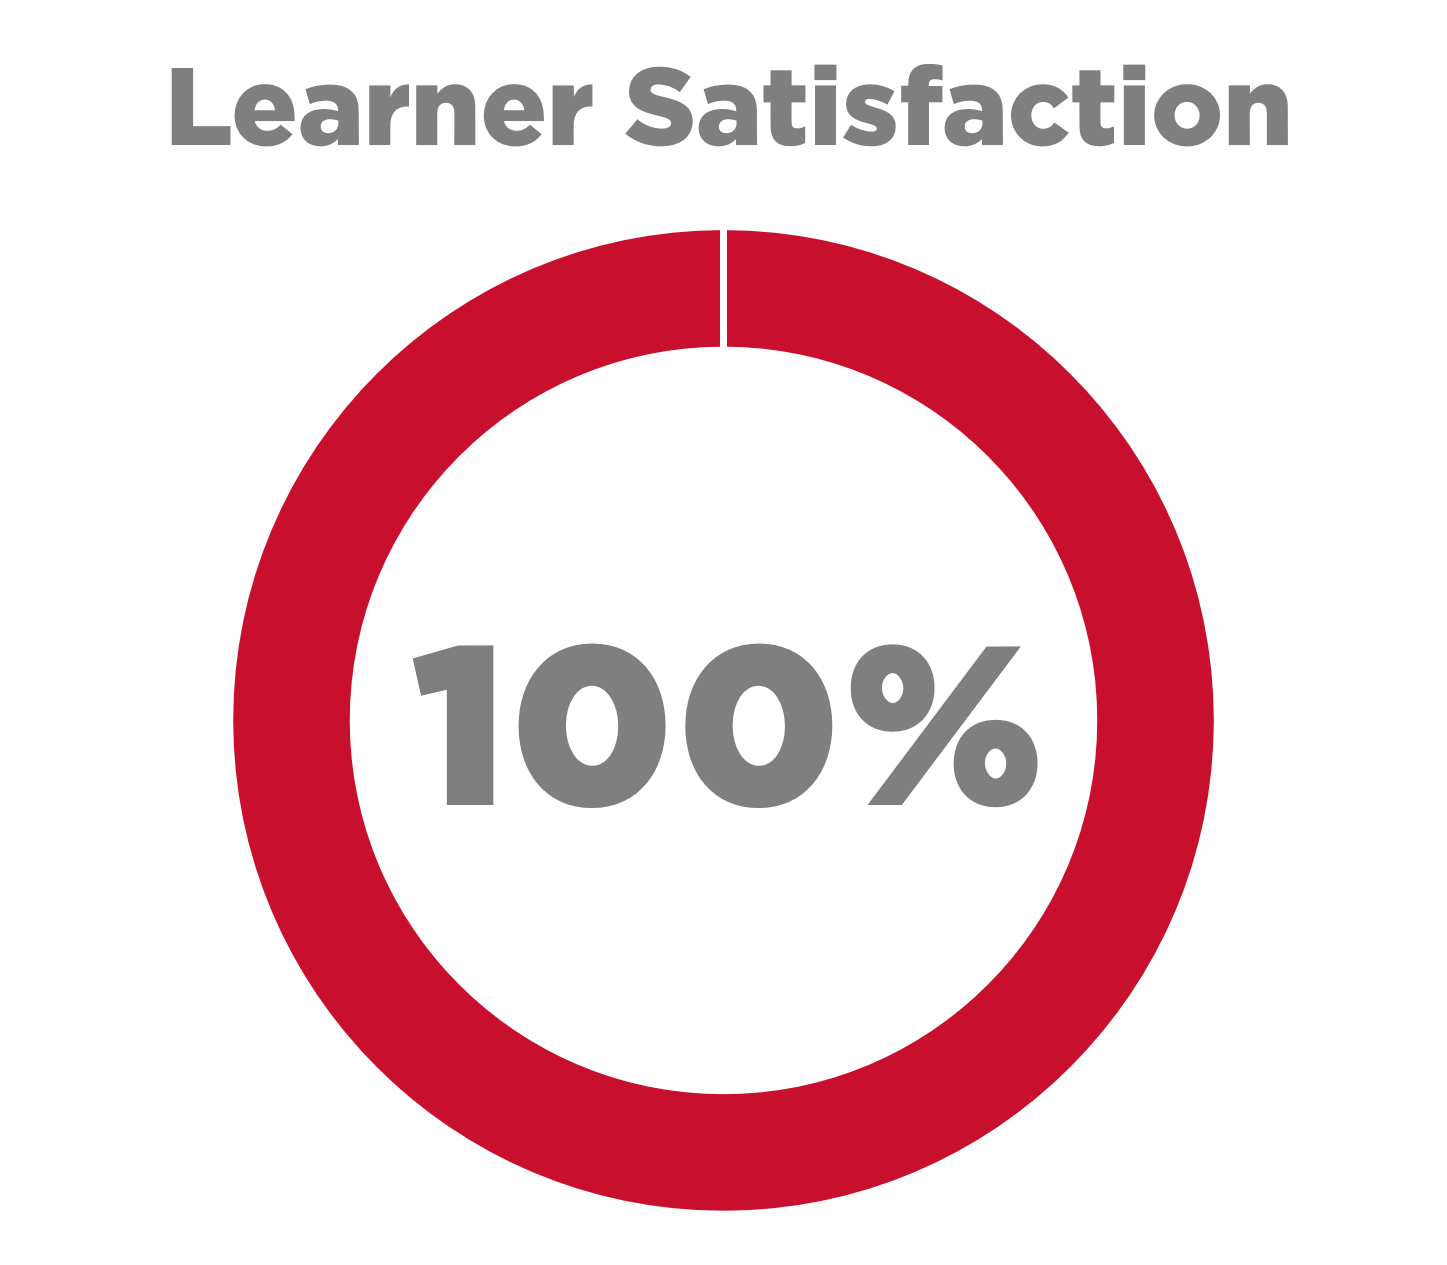 The title 'Learner satisfaction' above a solid red ring with '100%' in grey text within the ring.